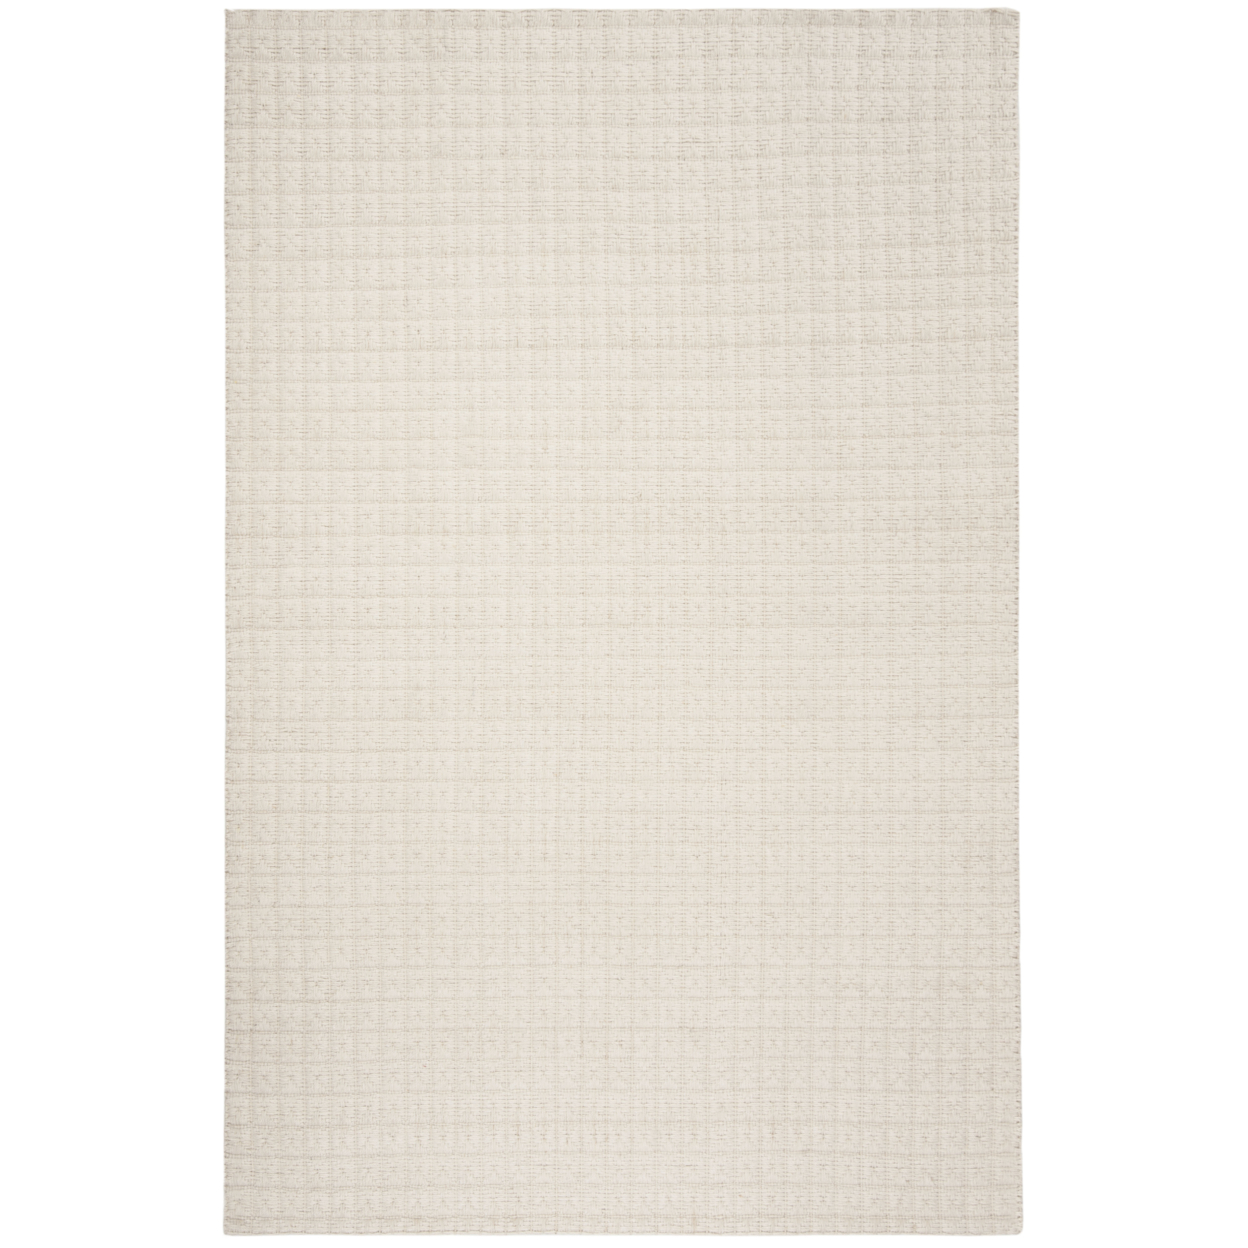 SAFAVIEH Natura Collection NAT407A Handwoven Ivory Rug - 5 X 8